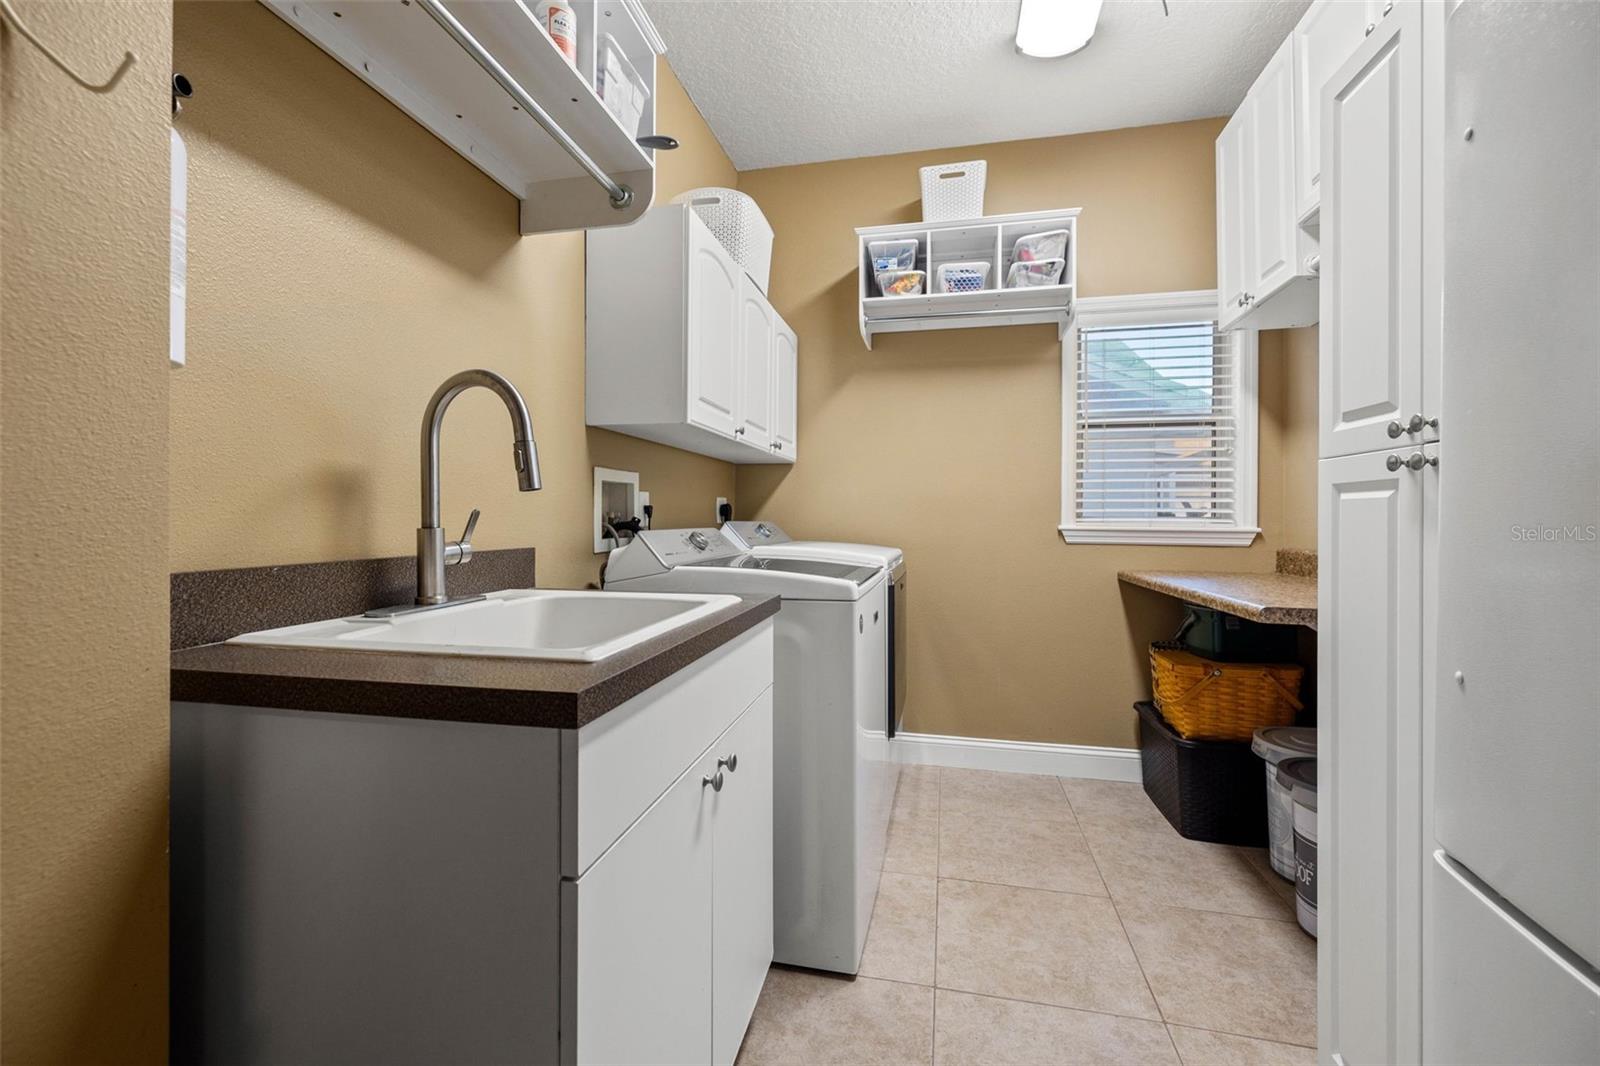 Indoor laundry & utility room with second fridge